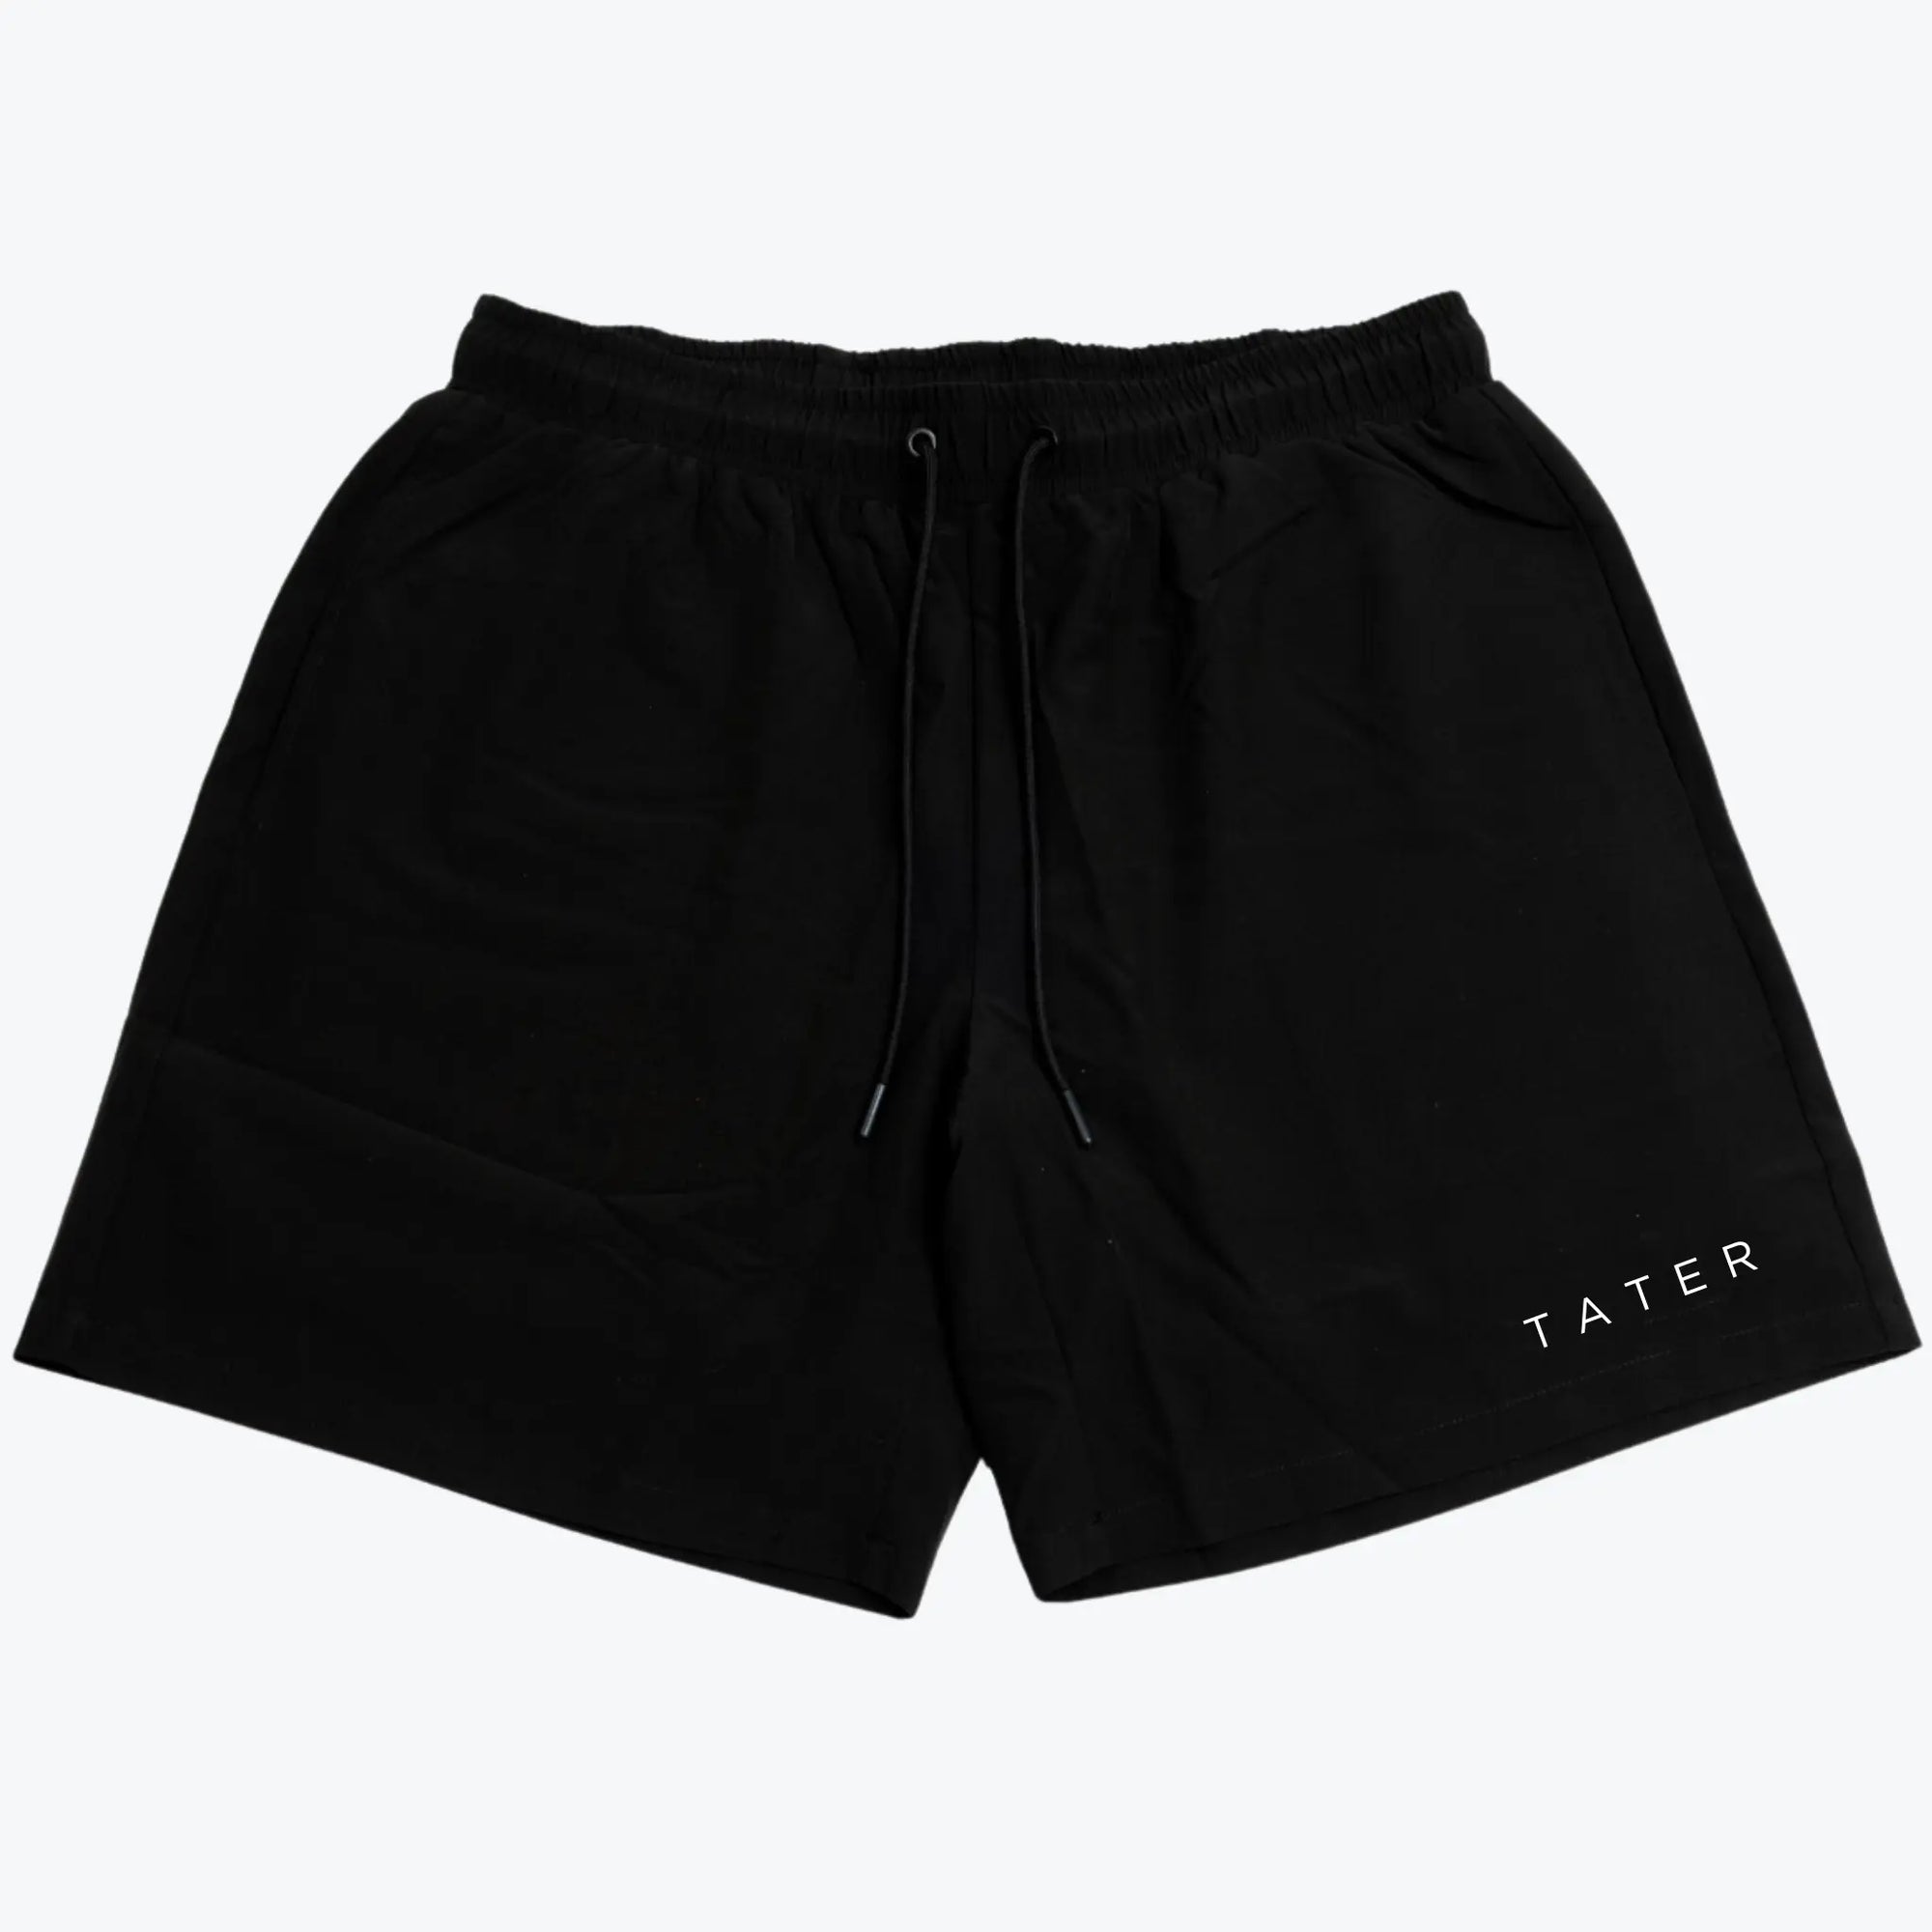 The image displays a pair of black athletic workout shorts that feature a white "TATER" logo on the left leg. These shorts are likely designed for comfort and performance, suitable for baseball practice or general athletic activities. The shorts seem to have a drawstring for adjustable fit and might be compression lined, offering additional support and mobility for athletes. The black color is classic, making them versatile for pairing with other athletic wear.